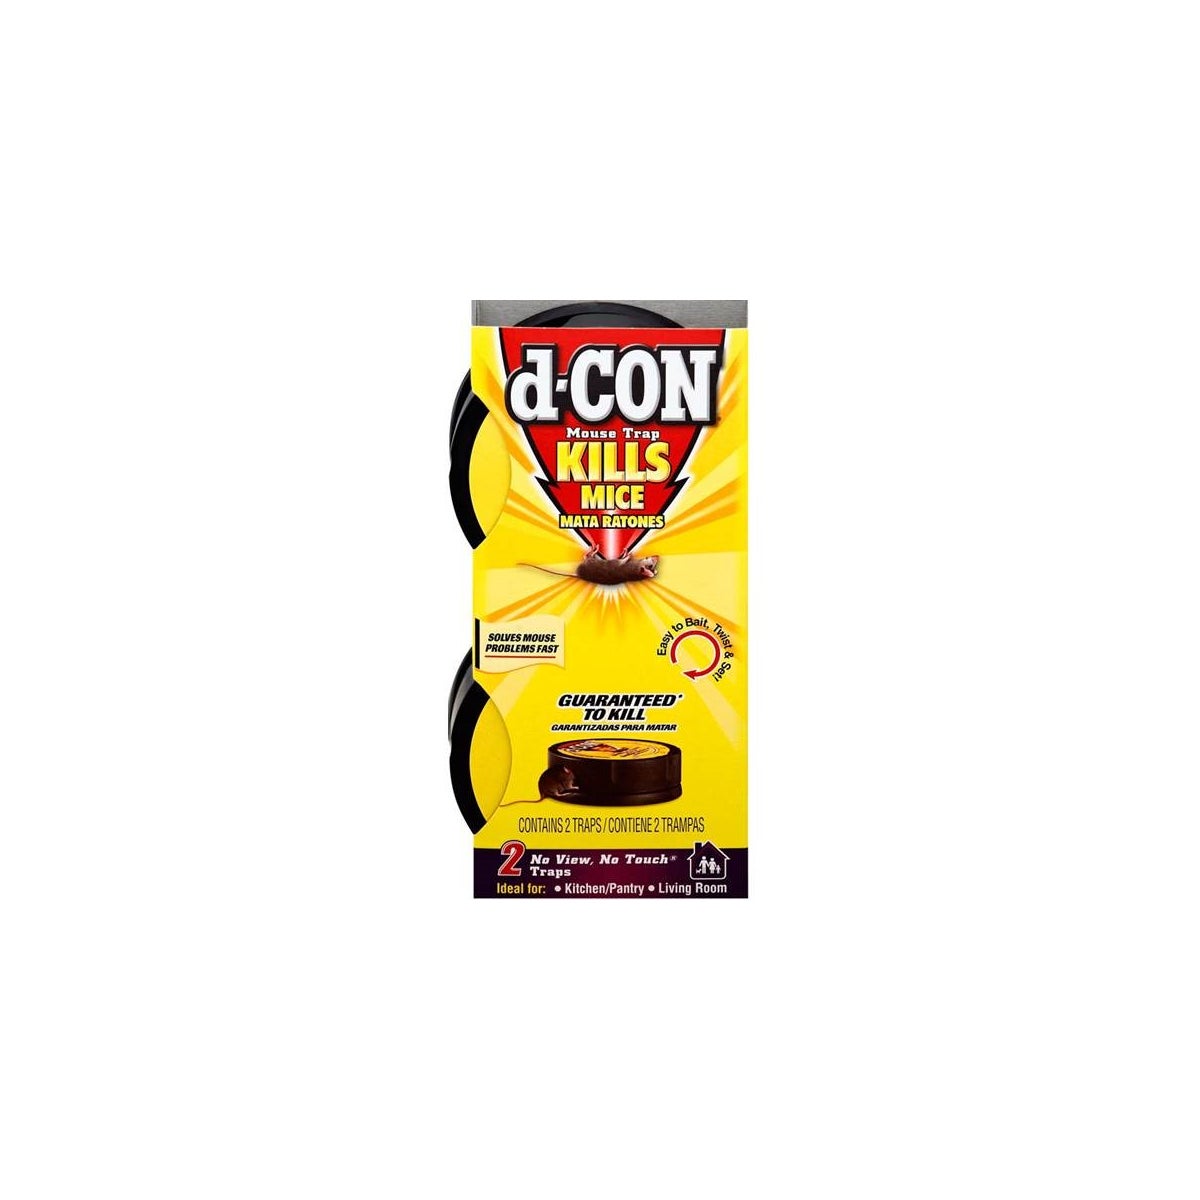 Buy D-Con No View, No Touch Mouse Trap